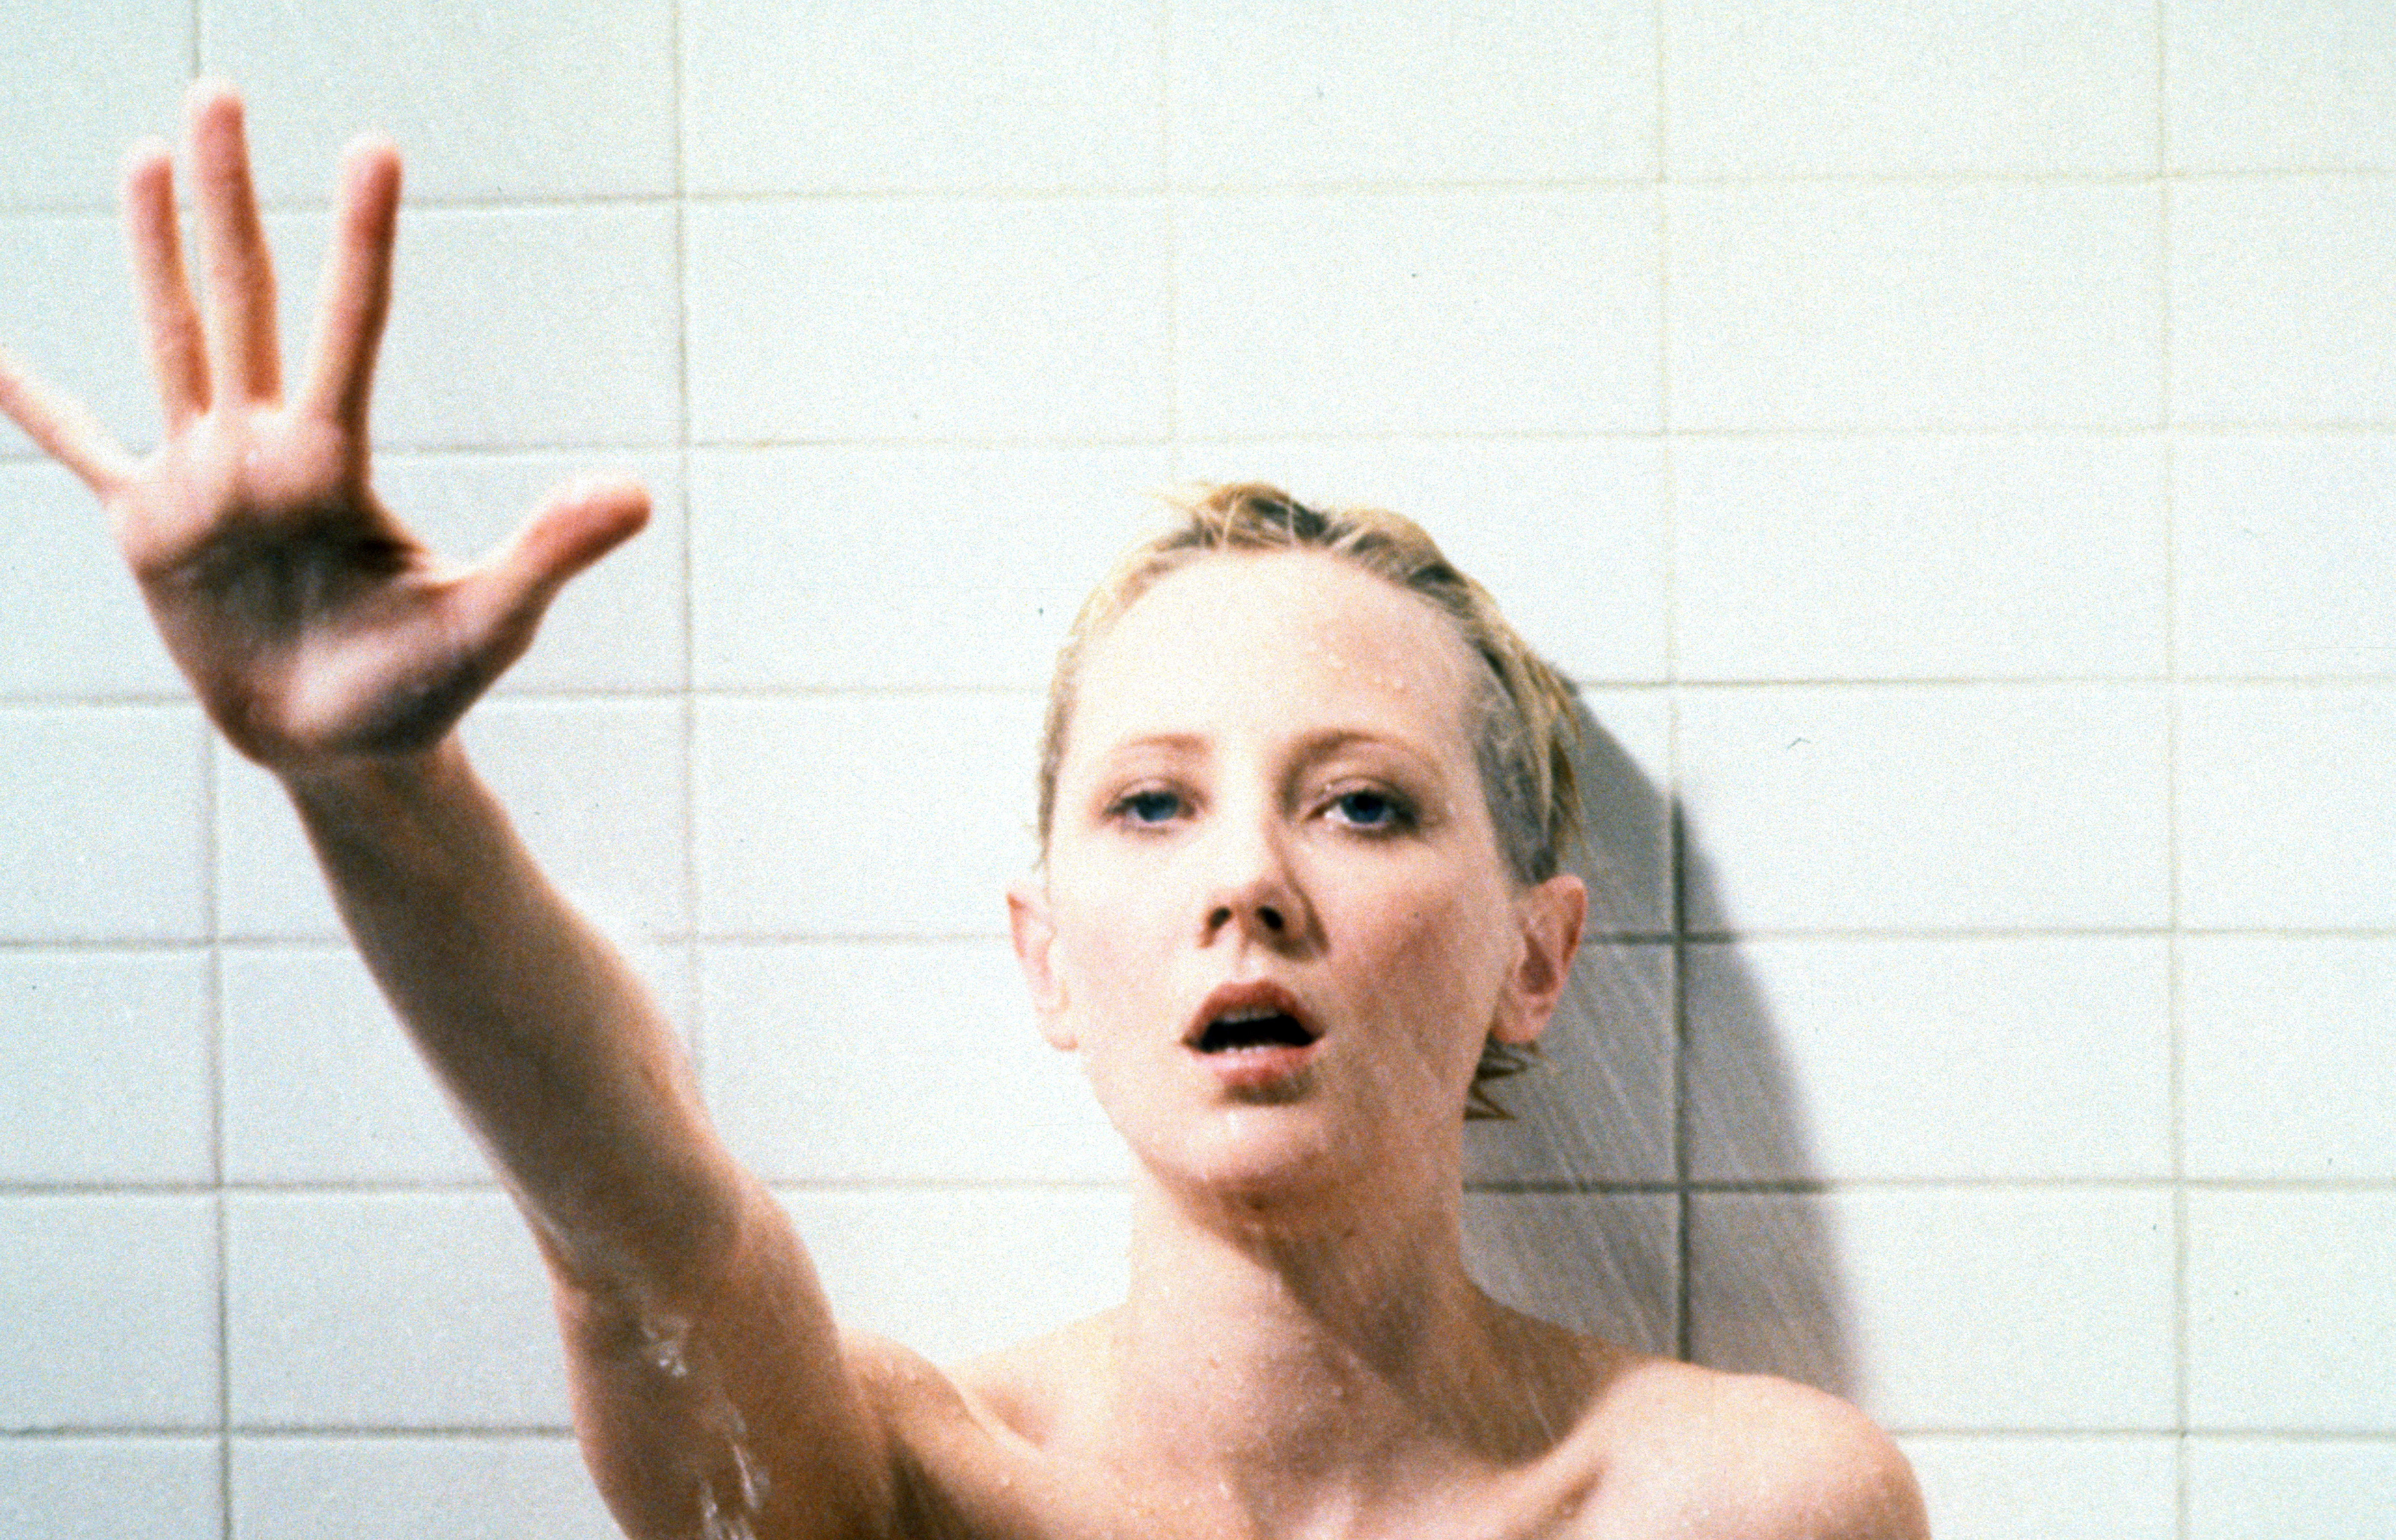 A distressed woman sticking her hand out while in the shower | Source: Getty Images